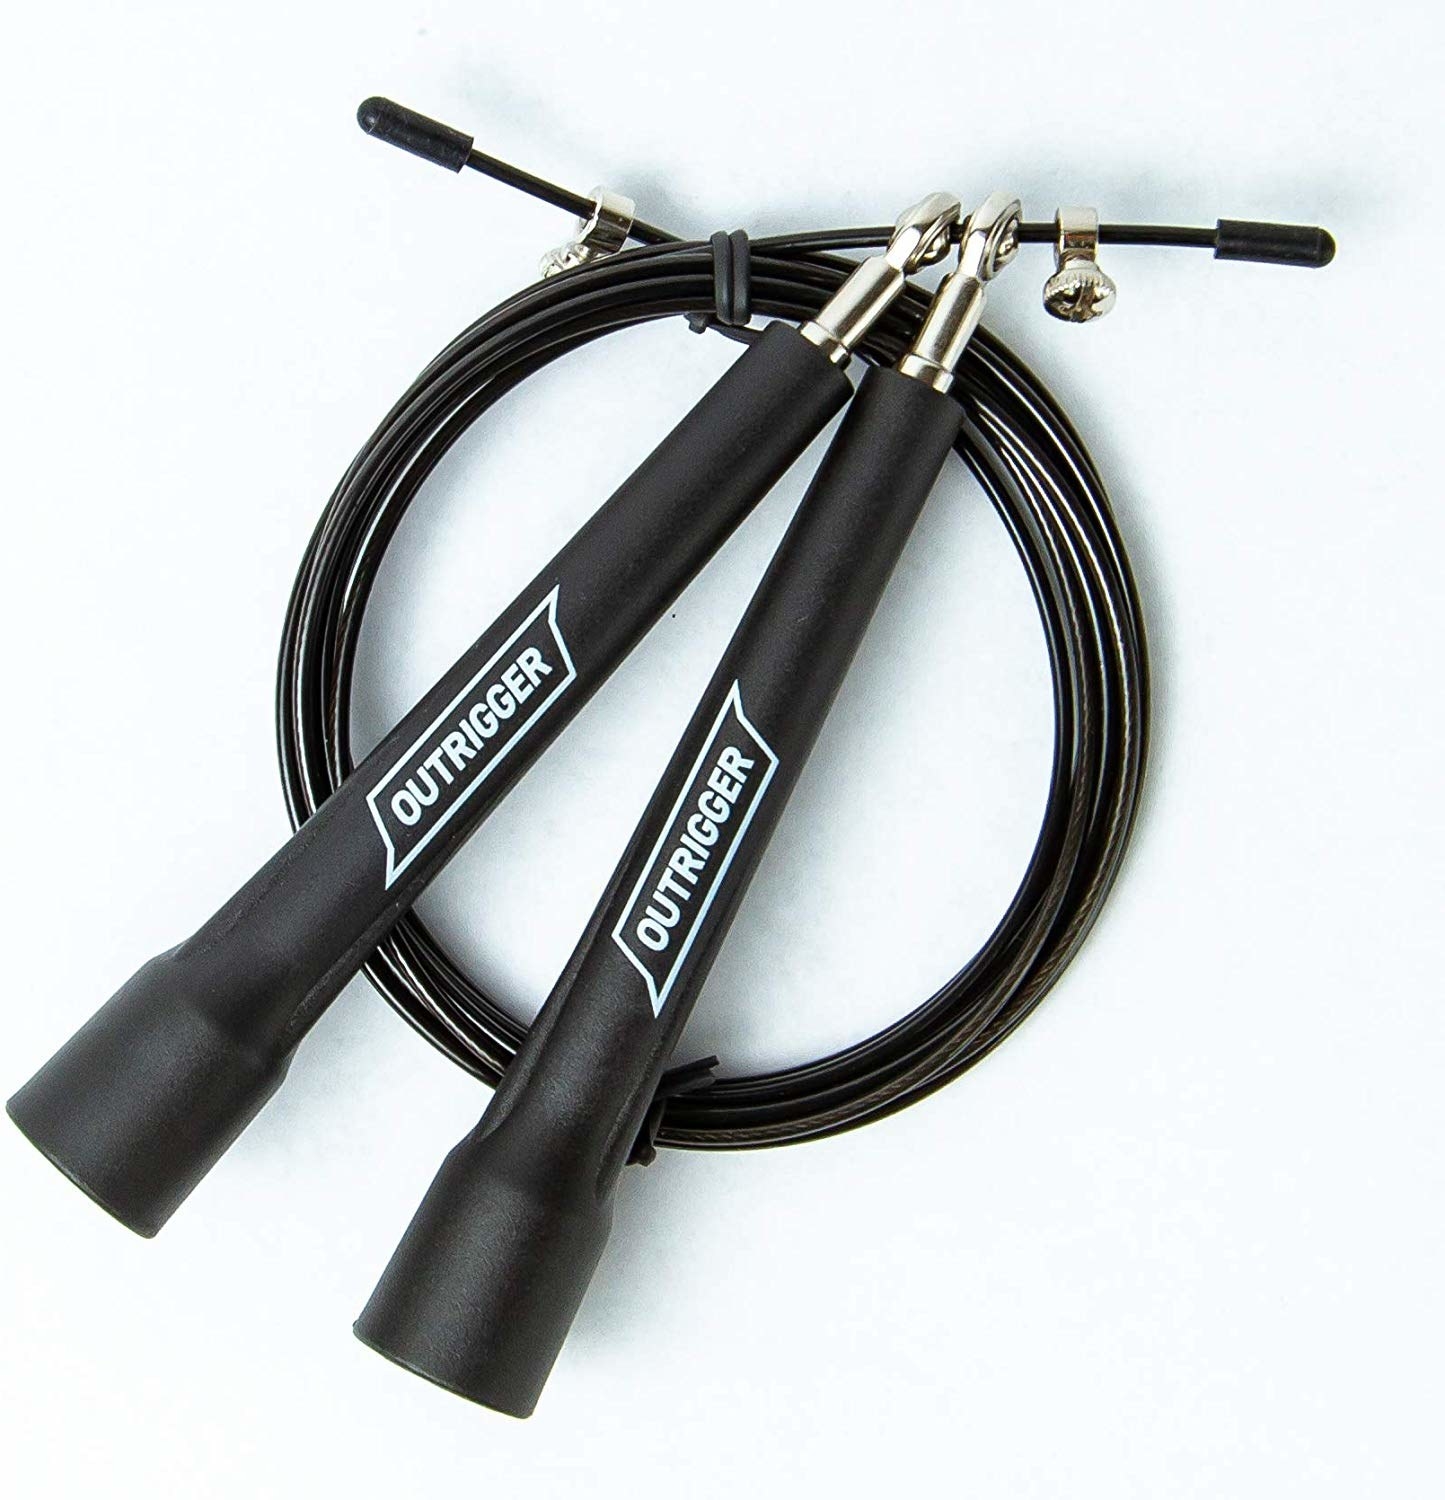 The speed skipping rope coiled up on a blank background